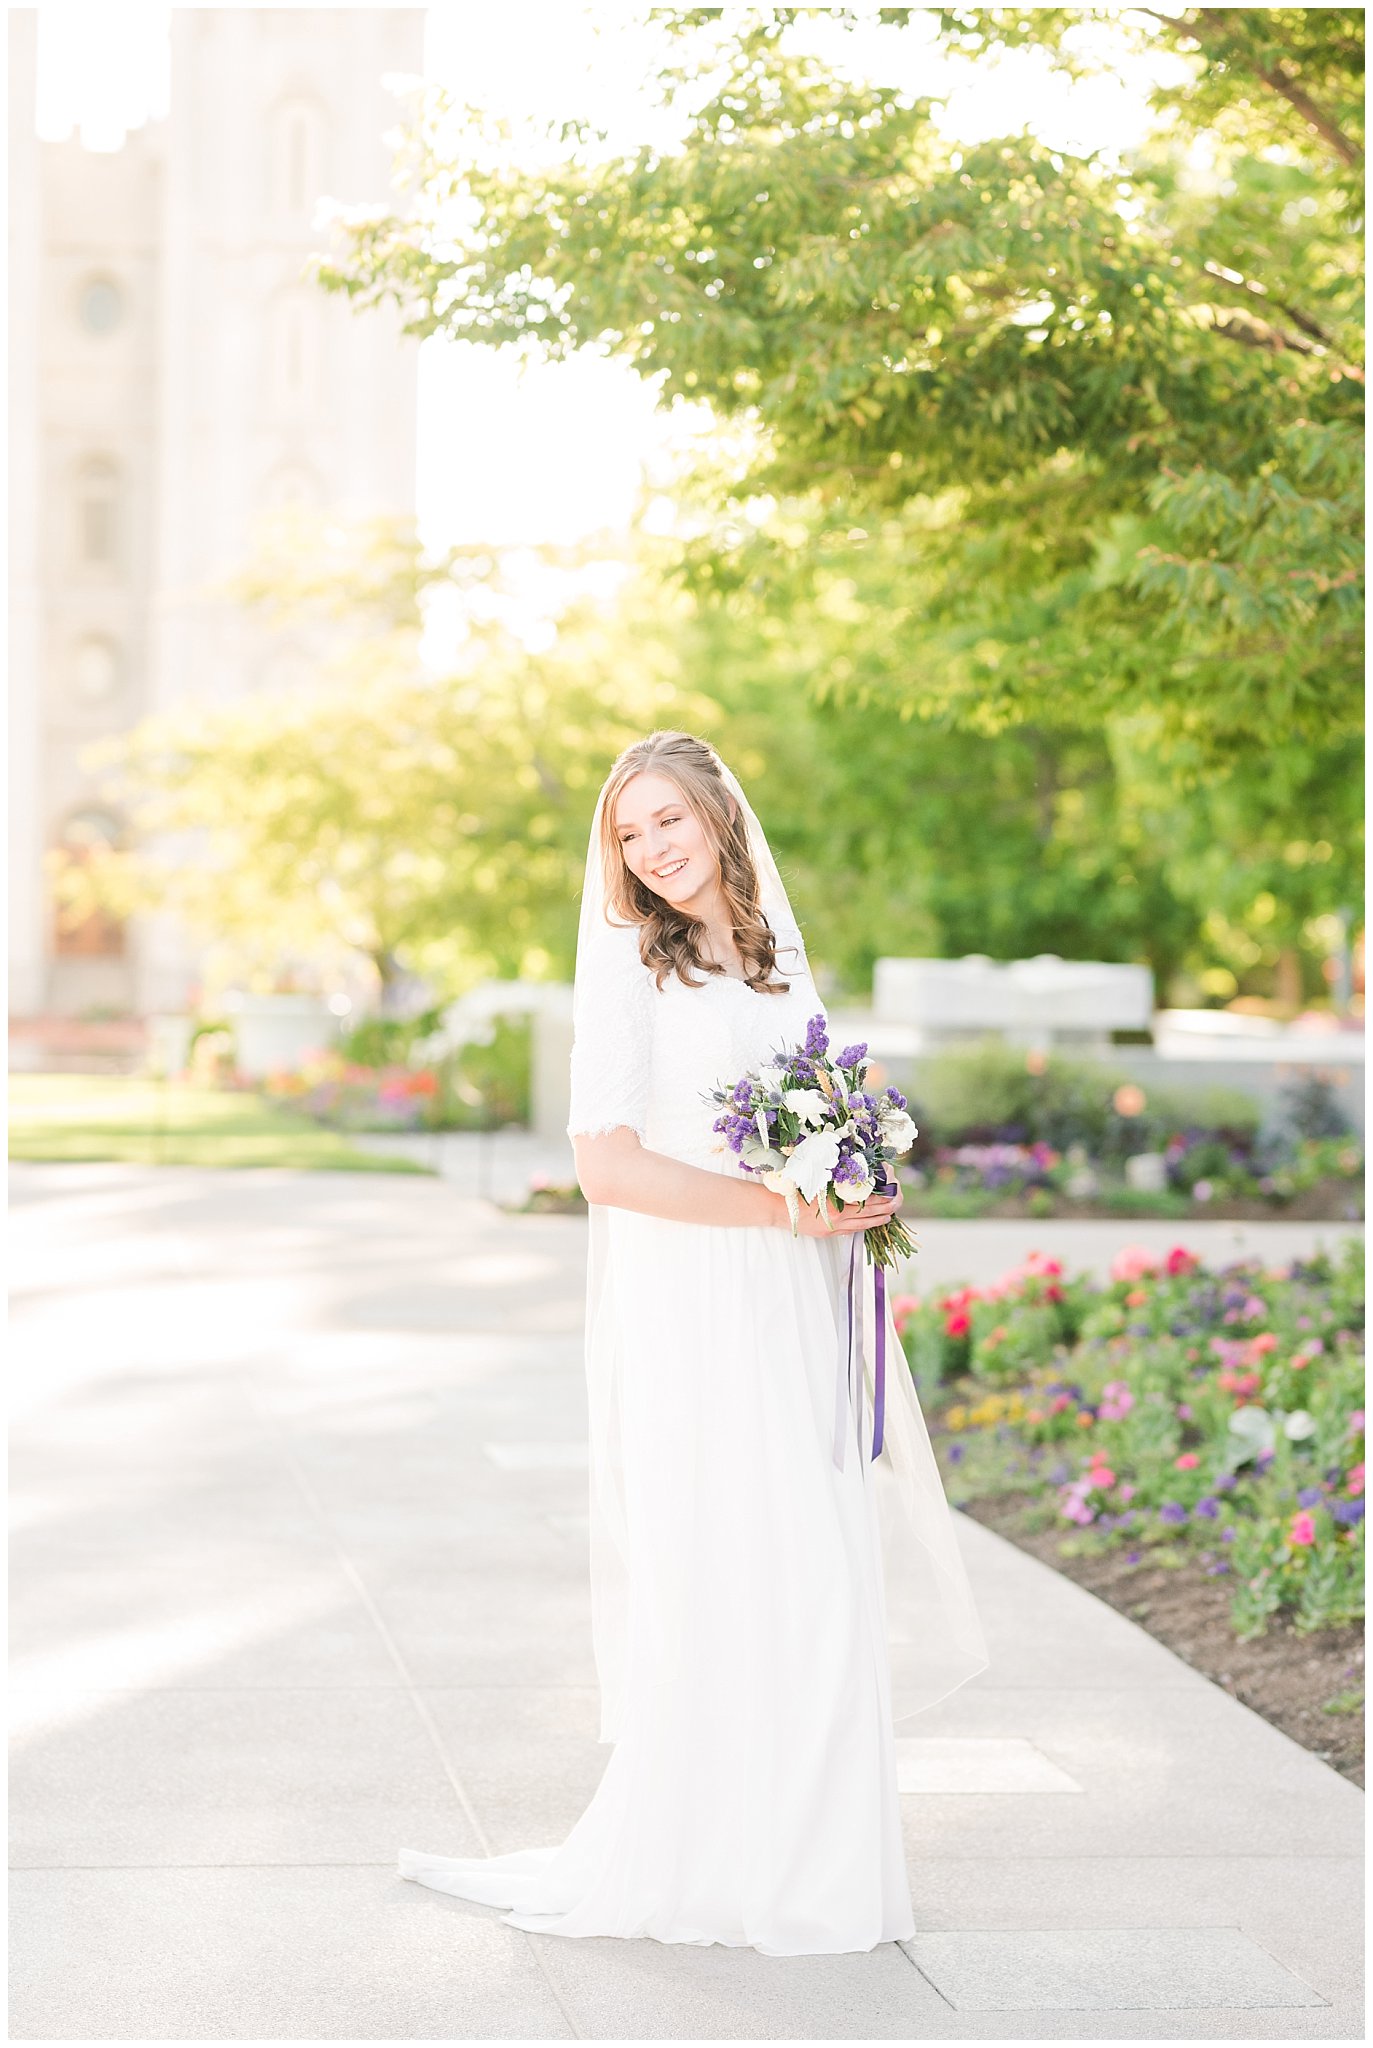 Bride wearing elegant, simple dress with veil with lavender florals | Elegant formal session at the Salt Lake Temple and Ensign Peak Formal Session | Jessie and Dallin Photography